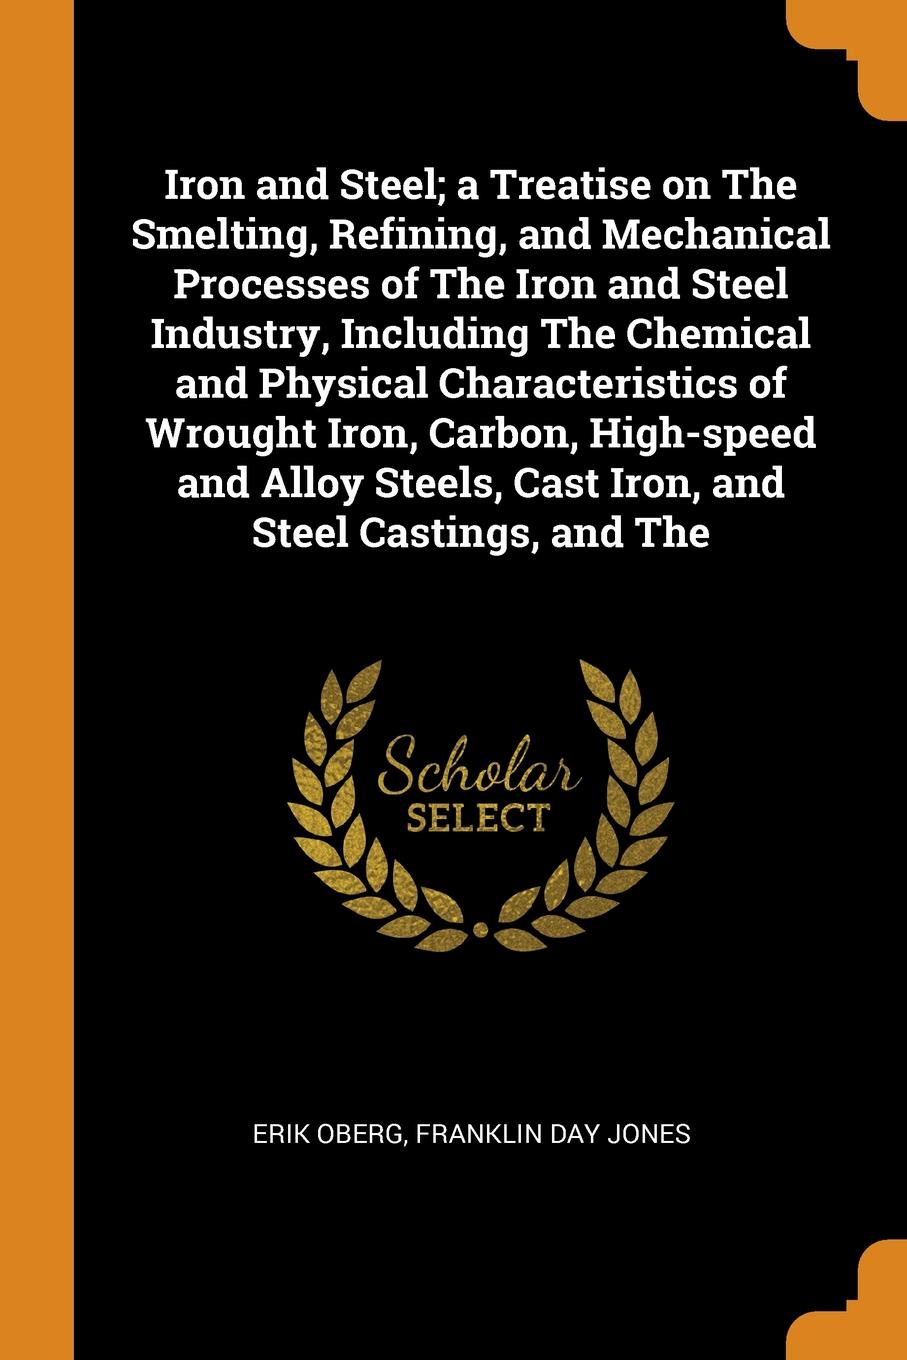 Iron and Steel; a Treatise on The Smelting, Refining, and Mechanical Processes of The Iron and Steel Industry, Including The Chemical and Physical Characteristics of Wrought Iron, Carbon, High-speed and Alloy Steels, Cast Iron, and Steel Castings,...